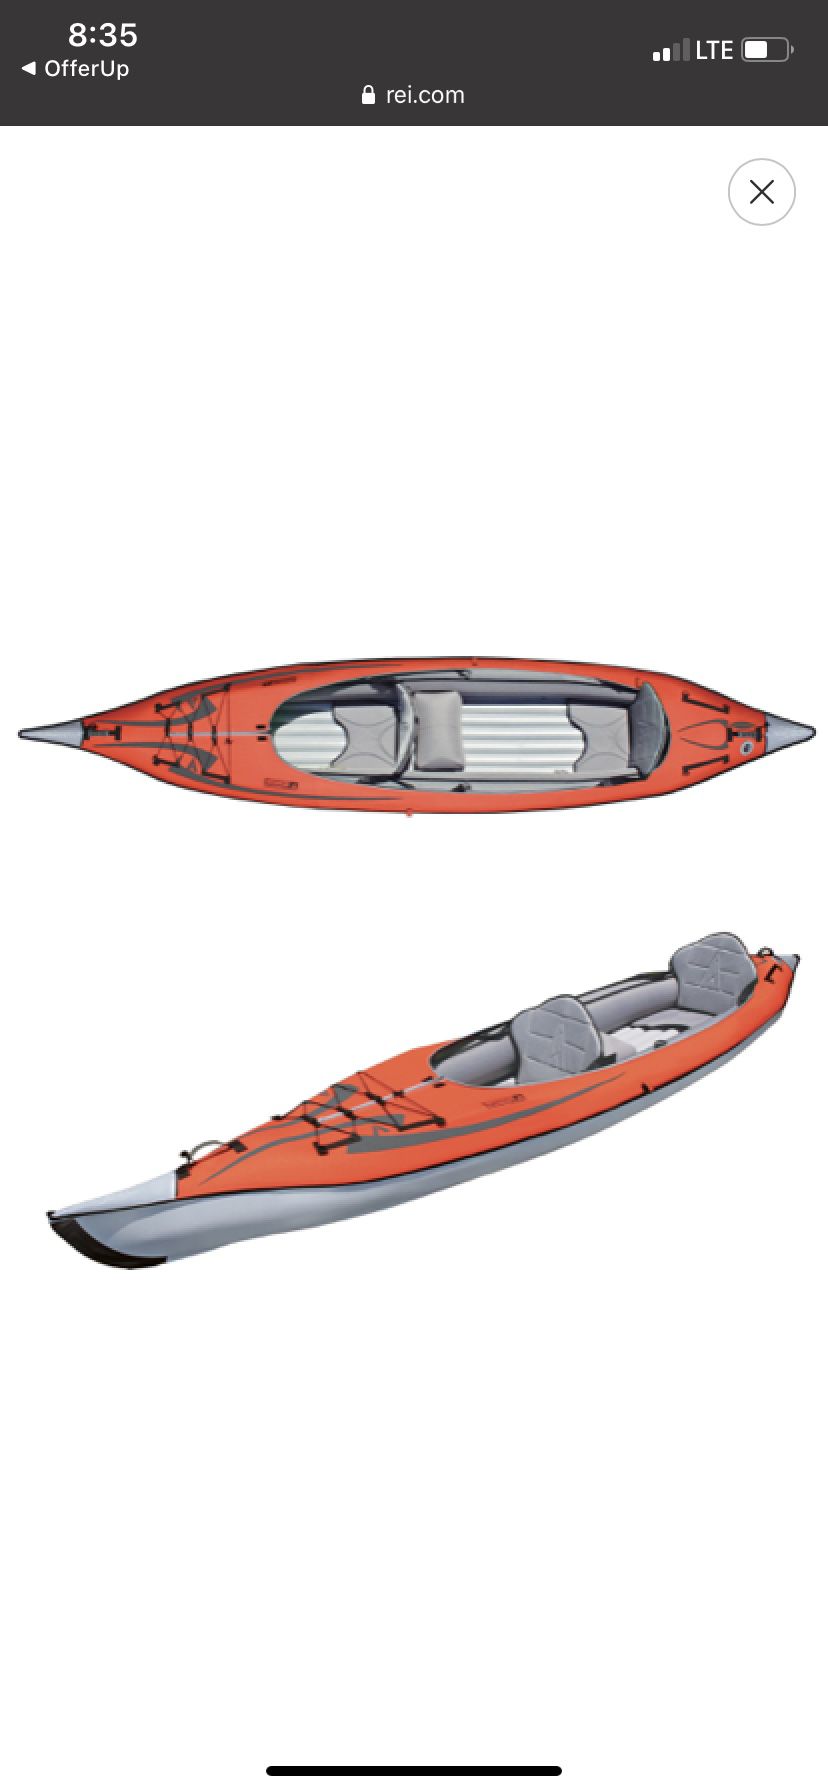 Advanced Elements Inflatable Kayak - 2 person